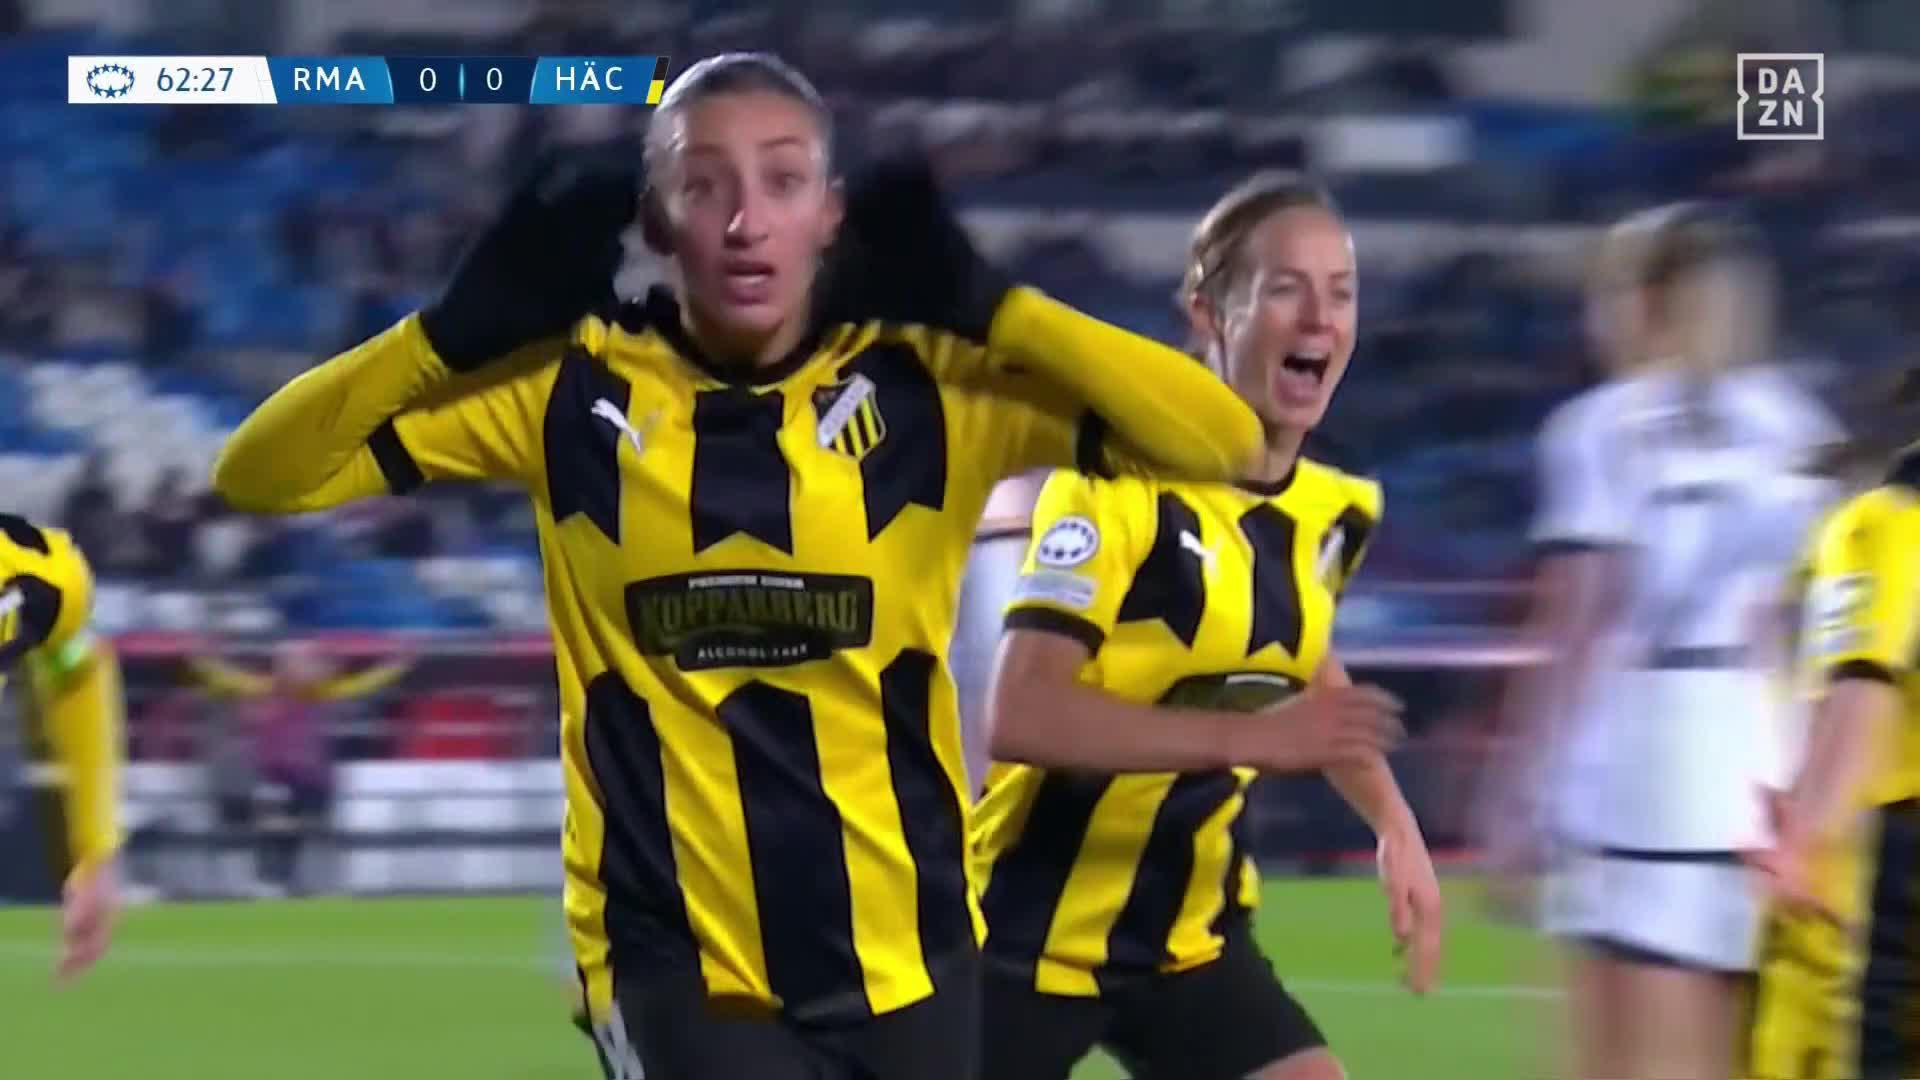 HACKEN TAKE THE LEAD!! 💥Rusul Kafaji finishes the move with a bullet header.  😮‍💨Watch the UWCL LIVE for FREE on DAZN 👉  #UWCLonDAZN